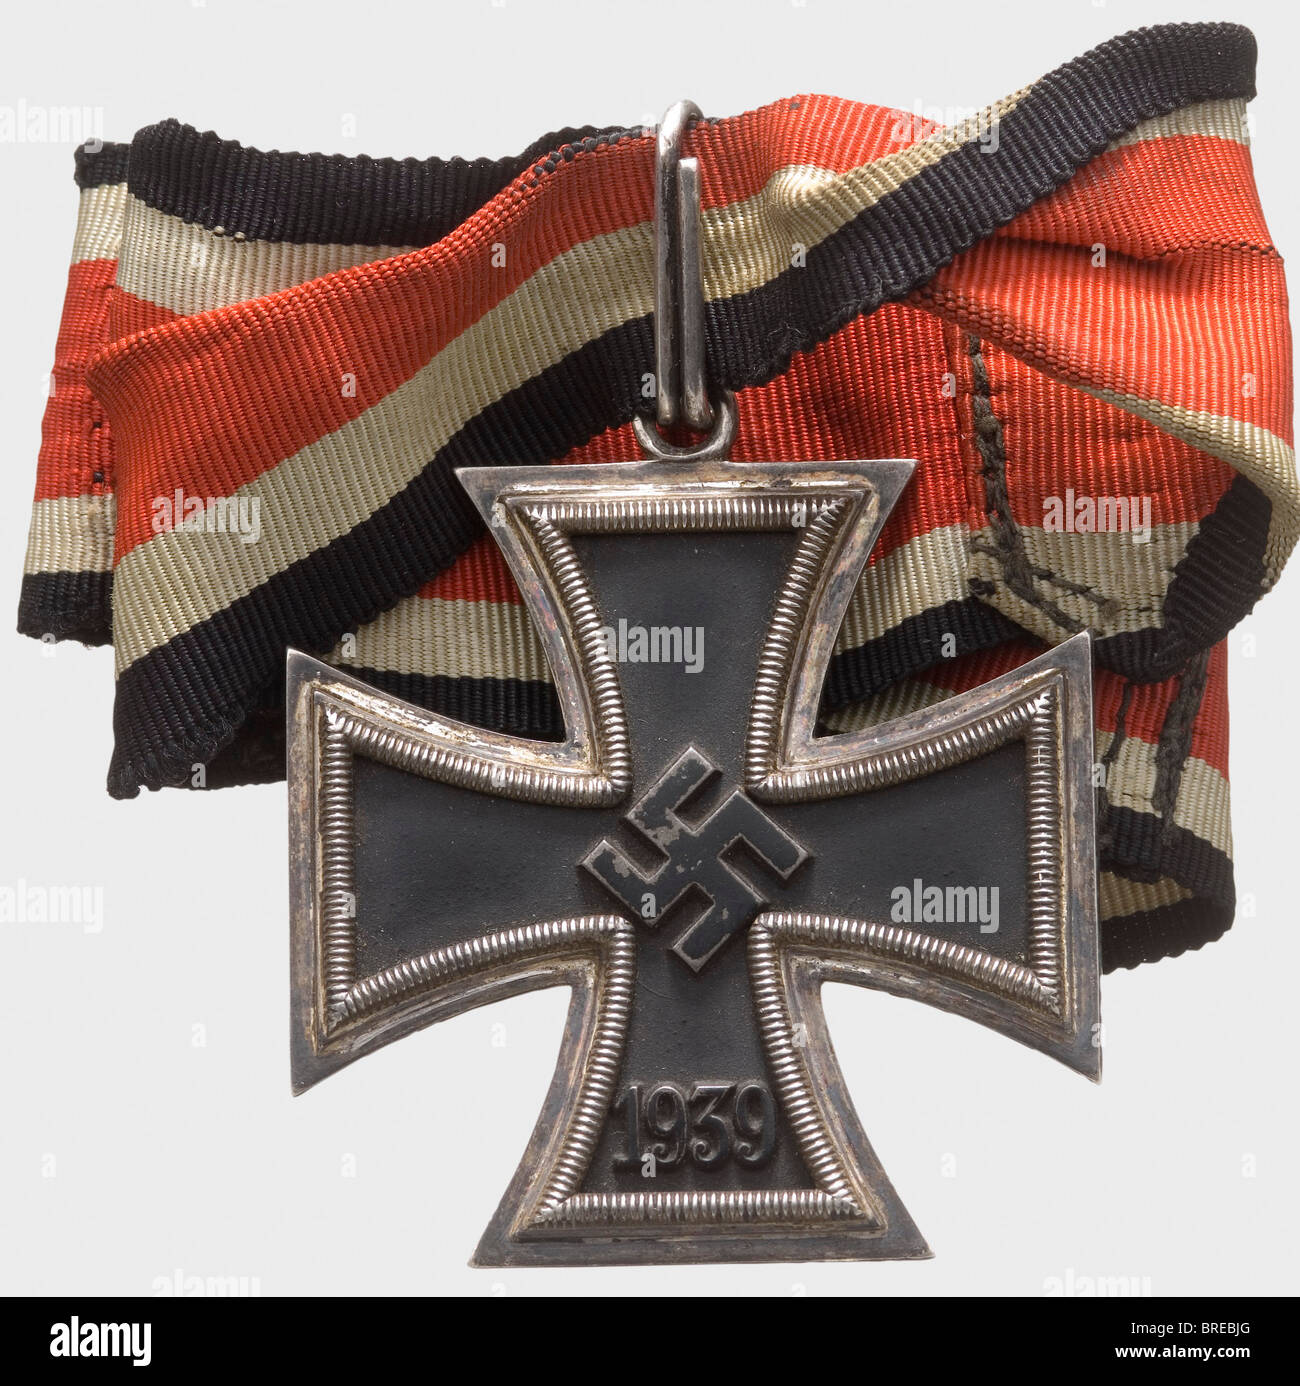 A Knight's Cross, of the Iron Cross 1939 Blackened iron core with rim-high swastika. Silver frame and suspension ring, each with mark of fineness '800'. Customised neck ribbon made from sections of Knight's Cross as well as Iron Cross 2nd Class ribbon. Signs of wear (OEK 3821). Included is a current Niemann photo expertise dated May 2008. historic, historical, 1930s, 20th century, awards, award, German Reich, Third Reich, Nazi era, National Socialism, object, objects, stills, medal, decoration, medals, decorations, clipping, cut out, cut-out, cut-outs, honor, h, Stock Photo